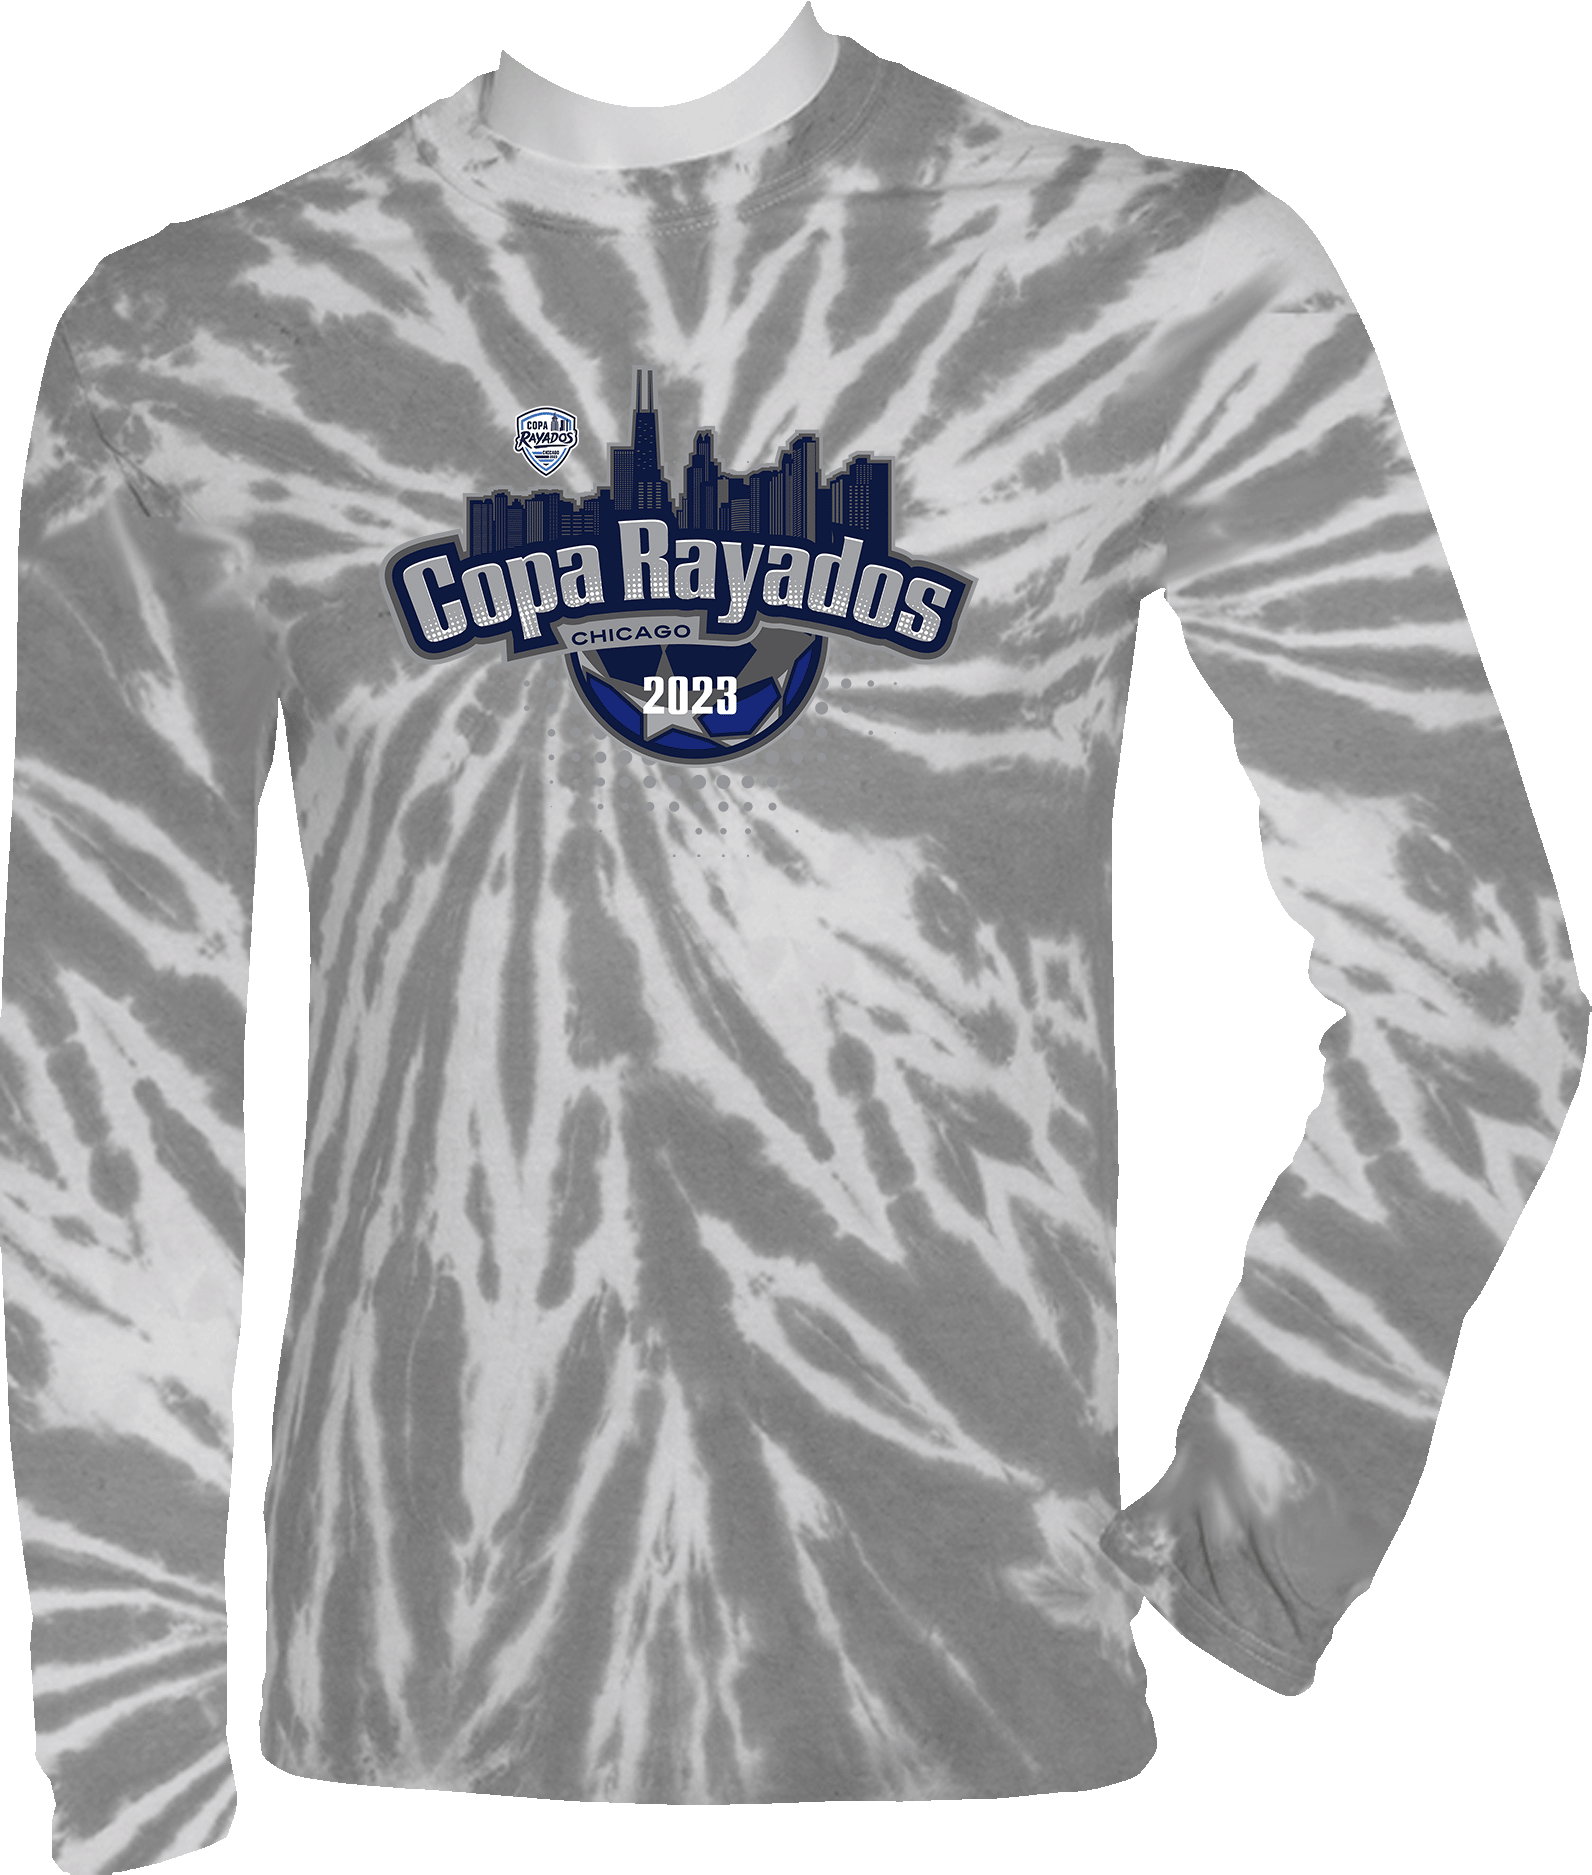 Tie-Dye Long Sleeves- 2023 Copa Rayados Chicago